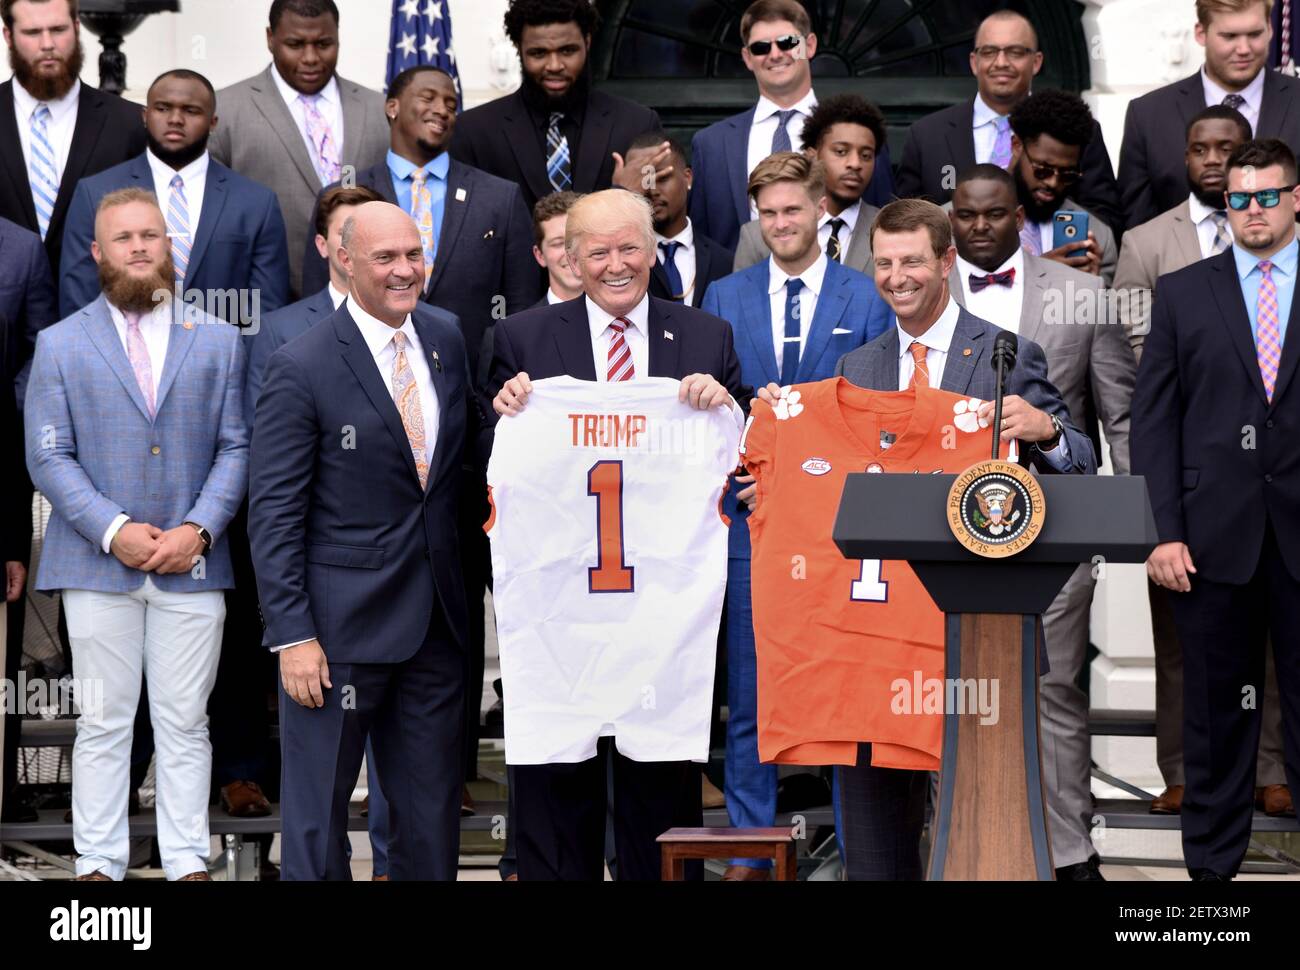 President Donald Trump holds a jersey during a ceremony to welcome the 2016  NCAA Football National Champions The Clemson Tigers on the South Lawn of  the White House on June 12, 2017.